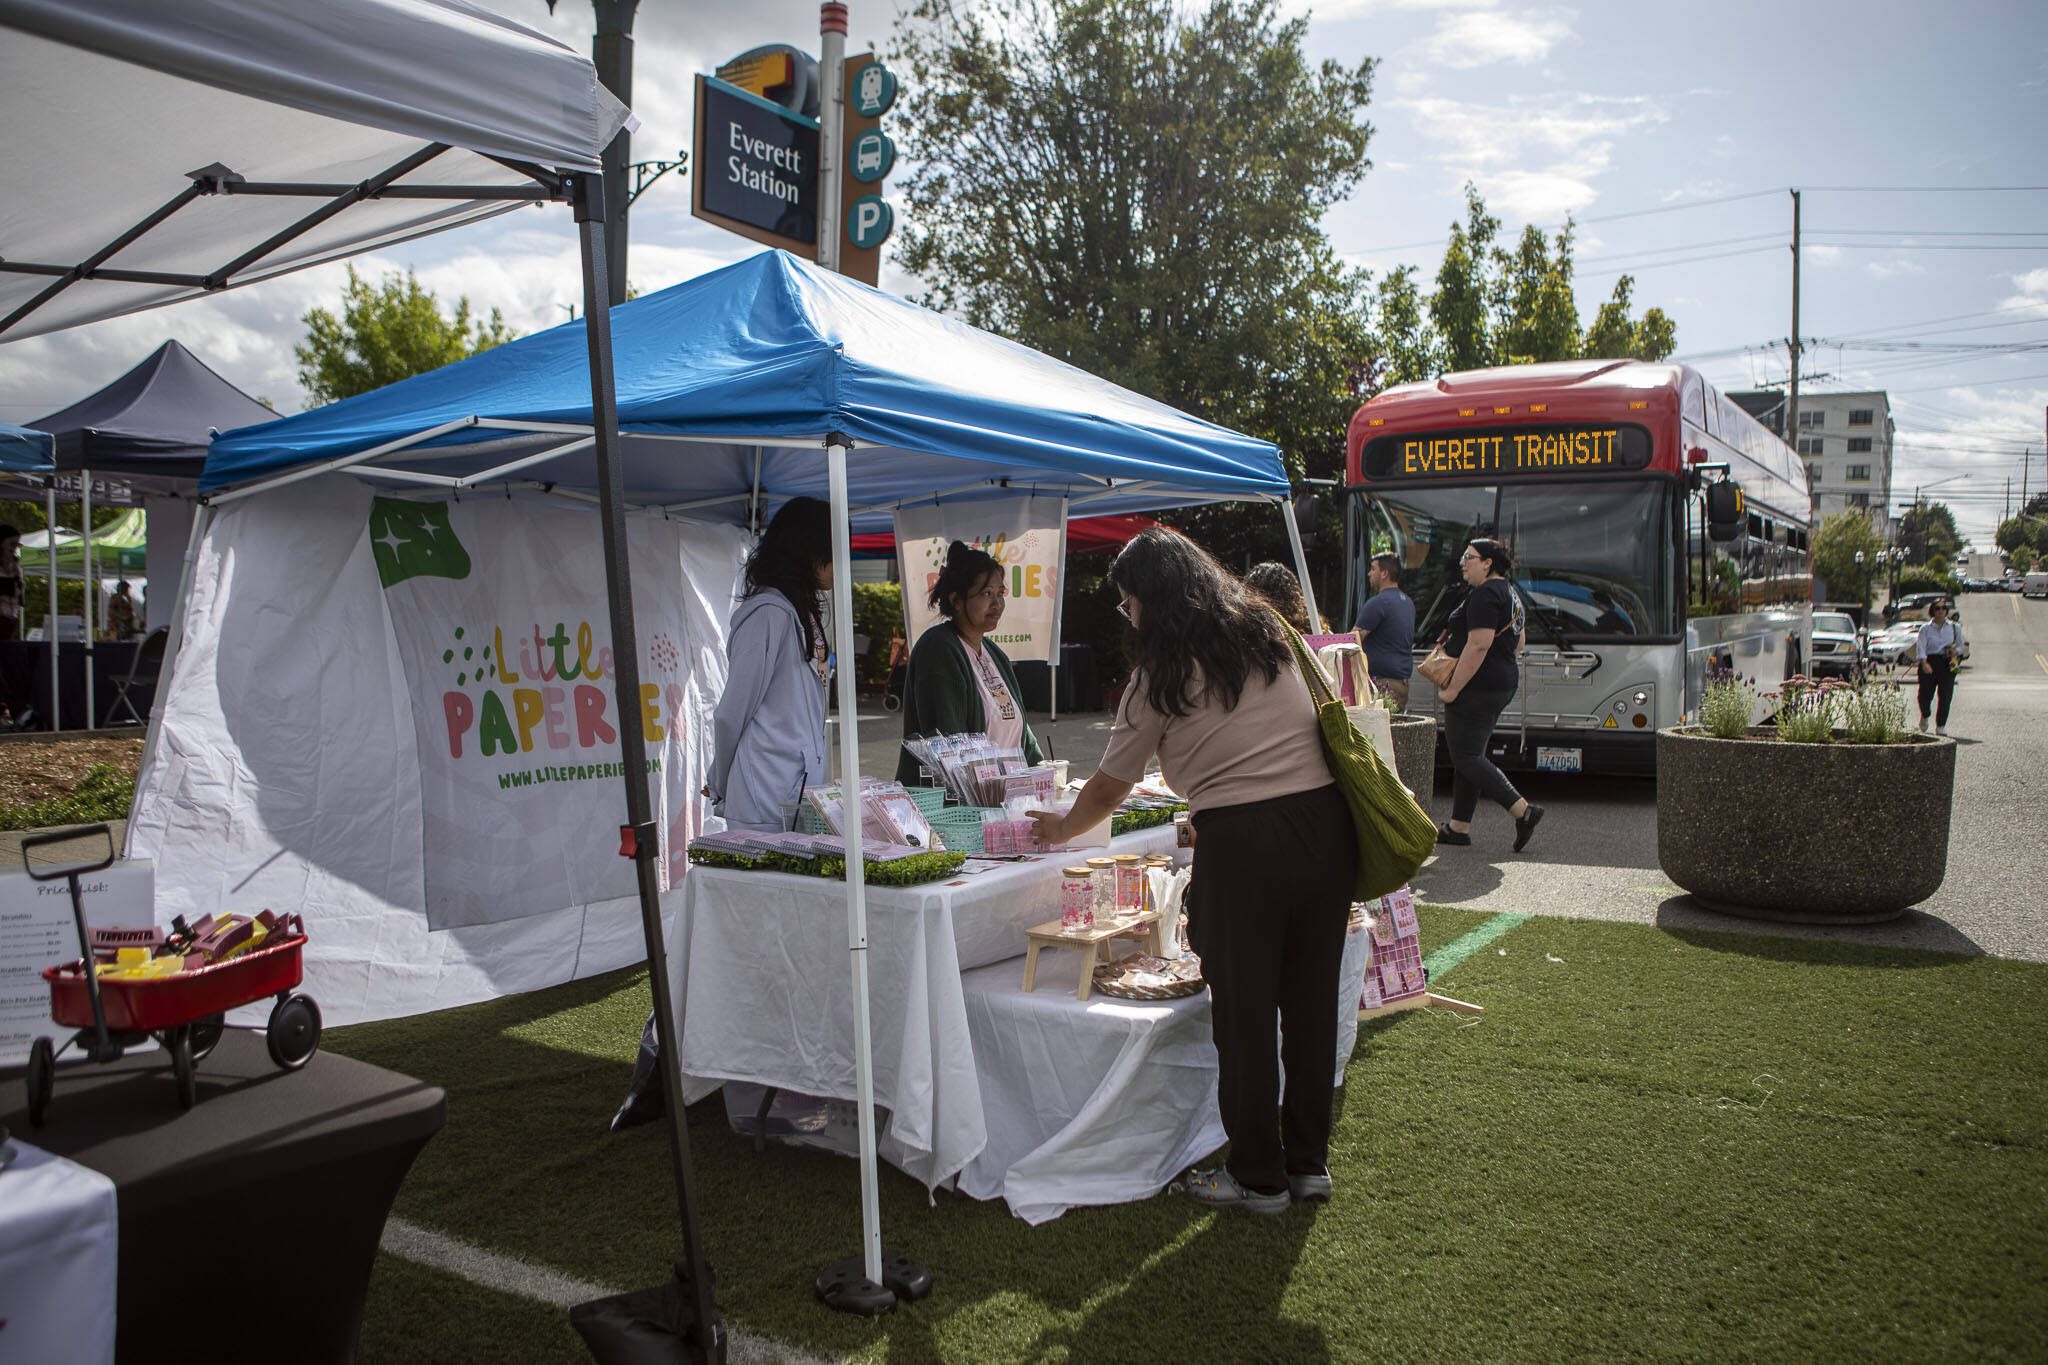 The Little Paperies booth at the Everett Farmers Market across from the Everett Station in Everett, Washington on June 14, 2023. (Annie Barker / The Herald)